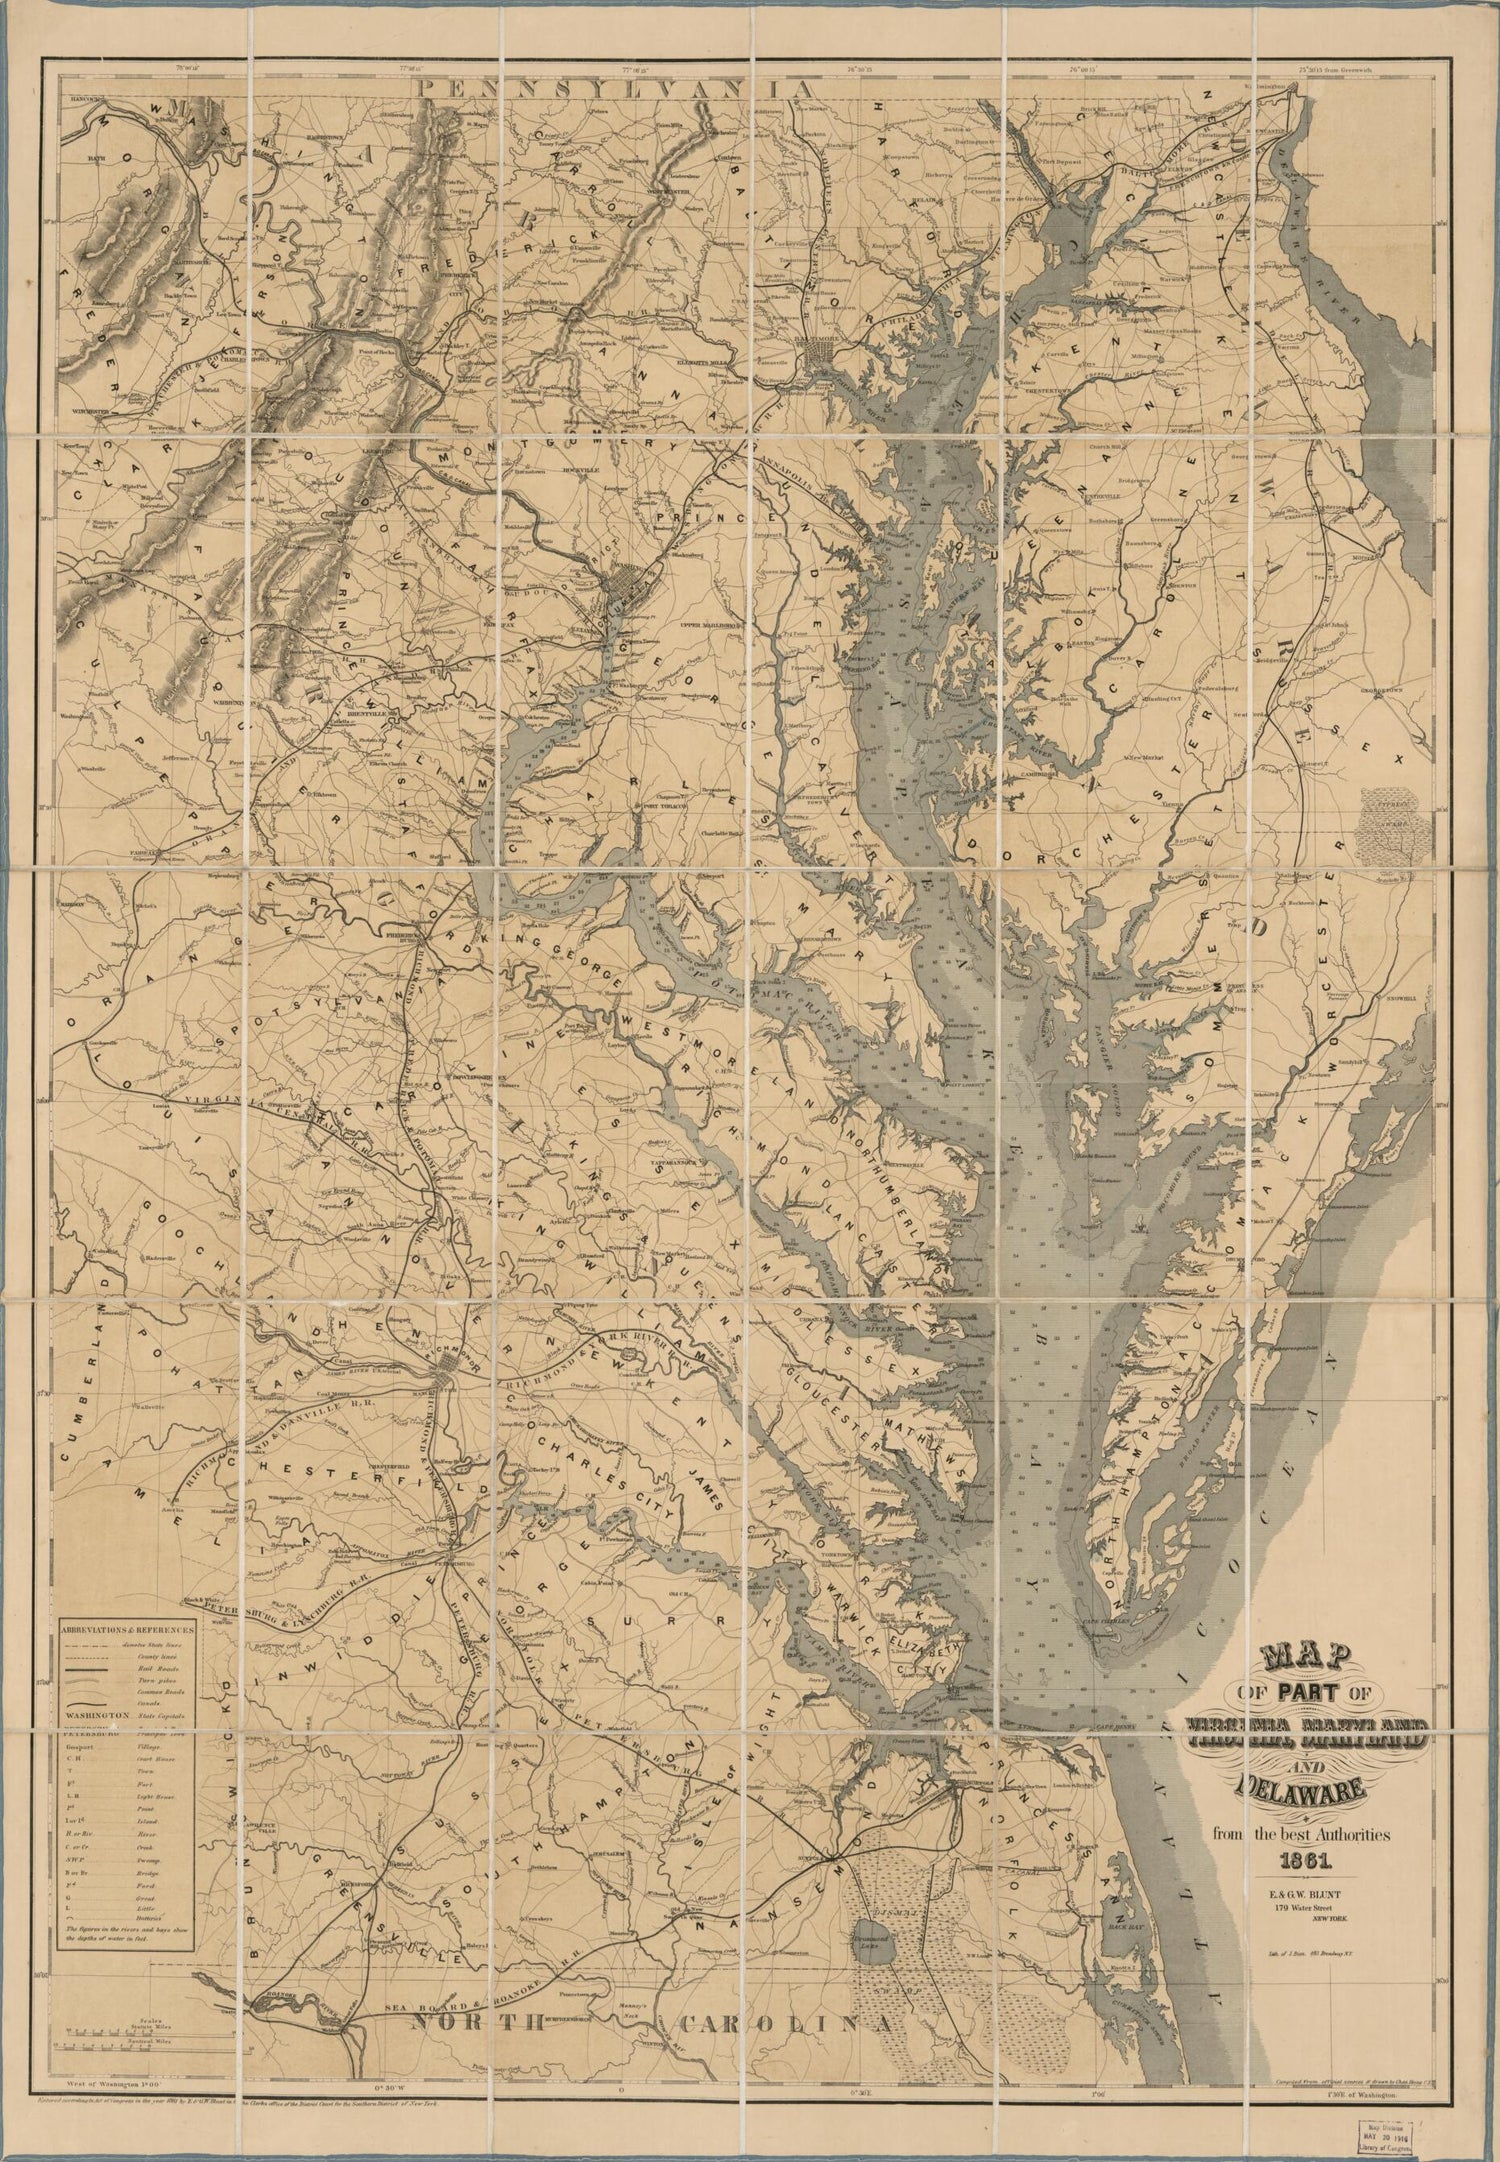 This old map of Map of Part of Virginia, Maryland, and Delaware : from the Best Authorities from 1861 was created by Julius Bien,  E. &amp; G.W. Blunt (Firm), Millard Fillmore, Chas. (Charles) Heyne in 1861